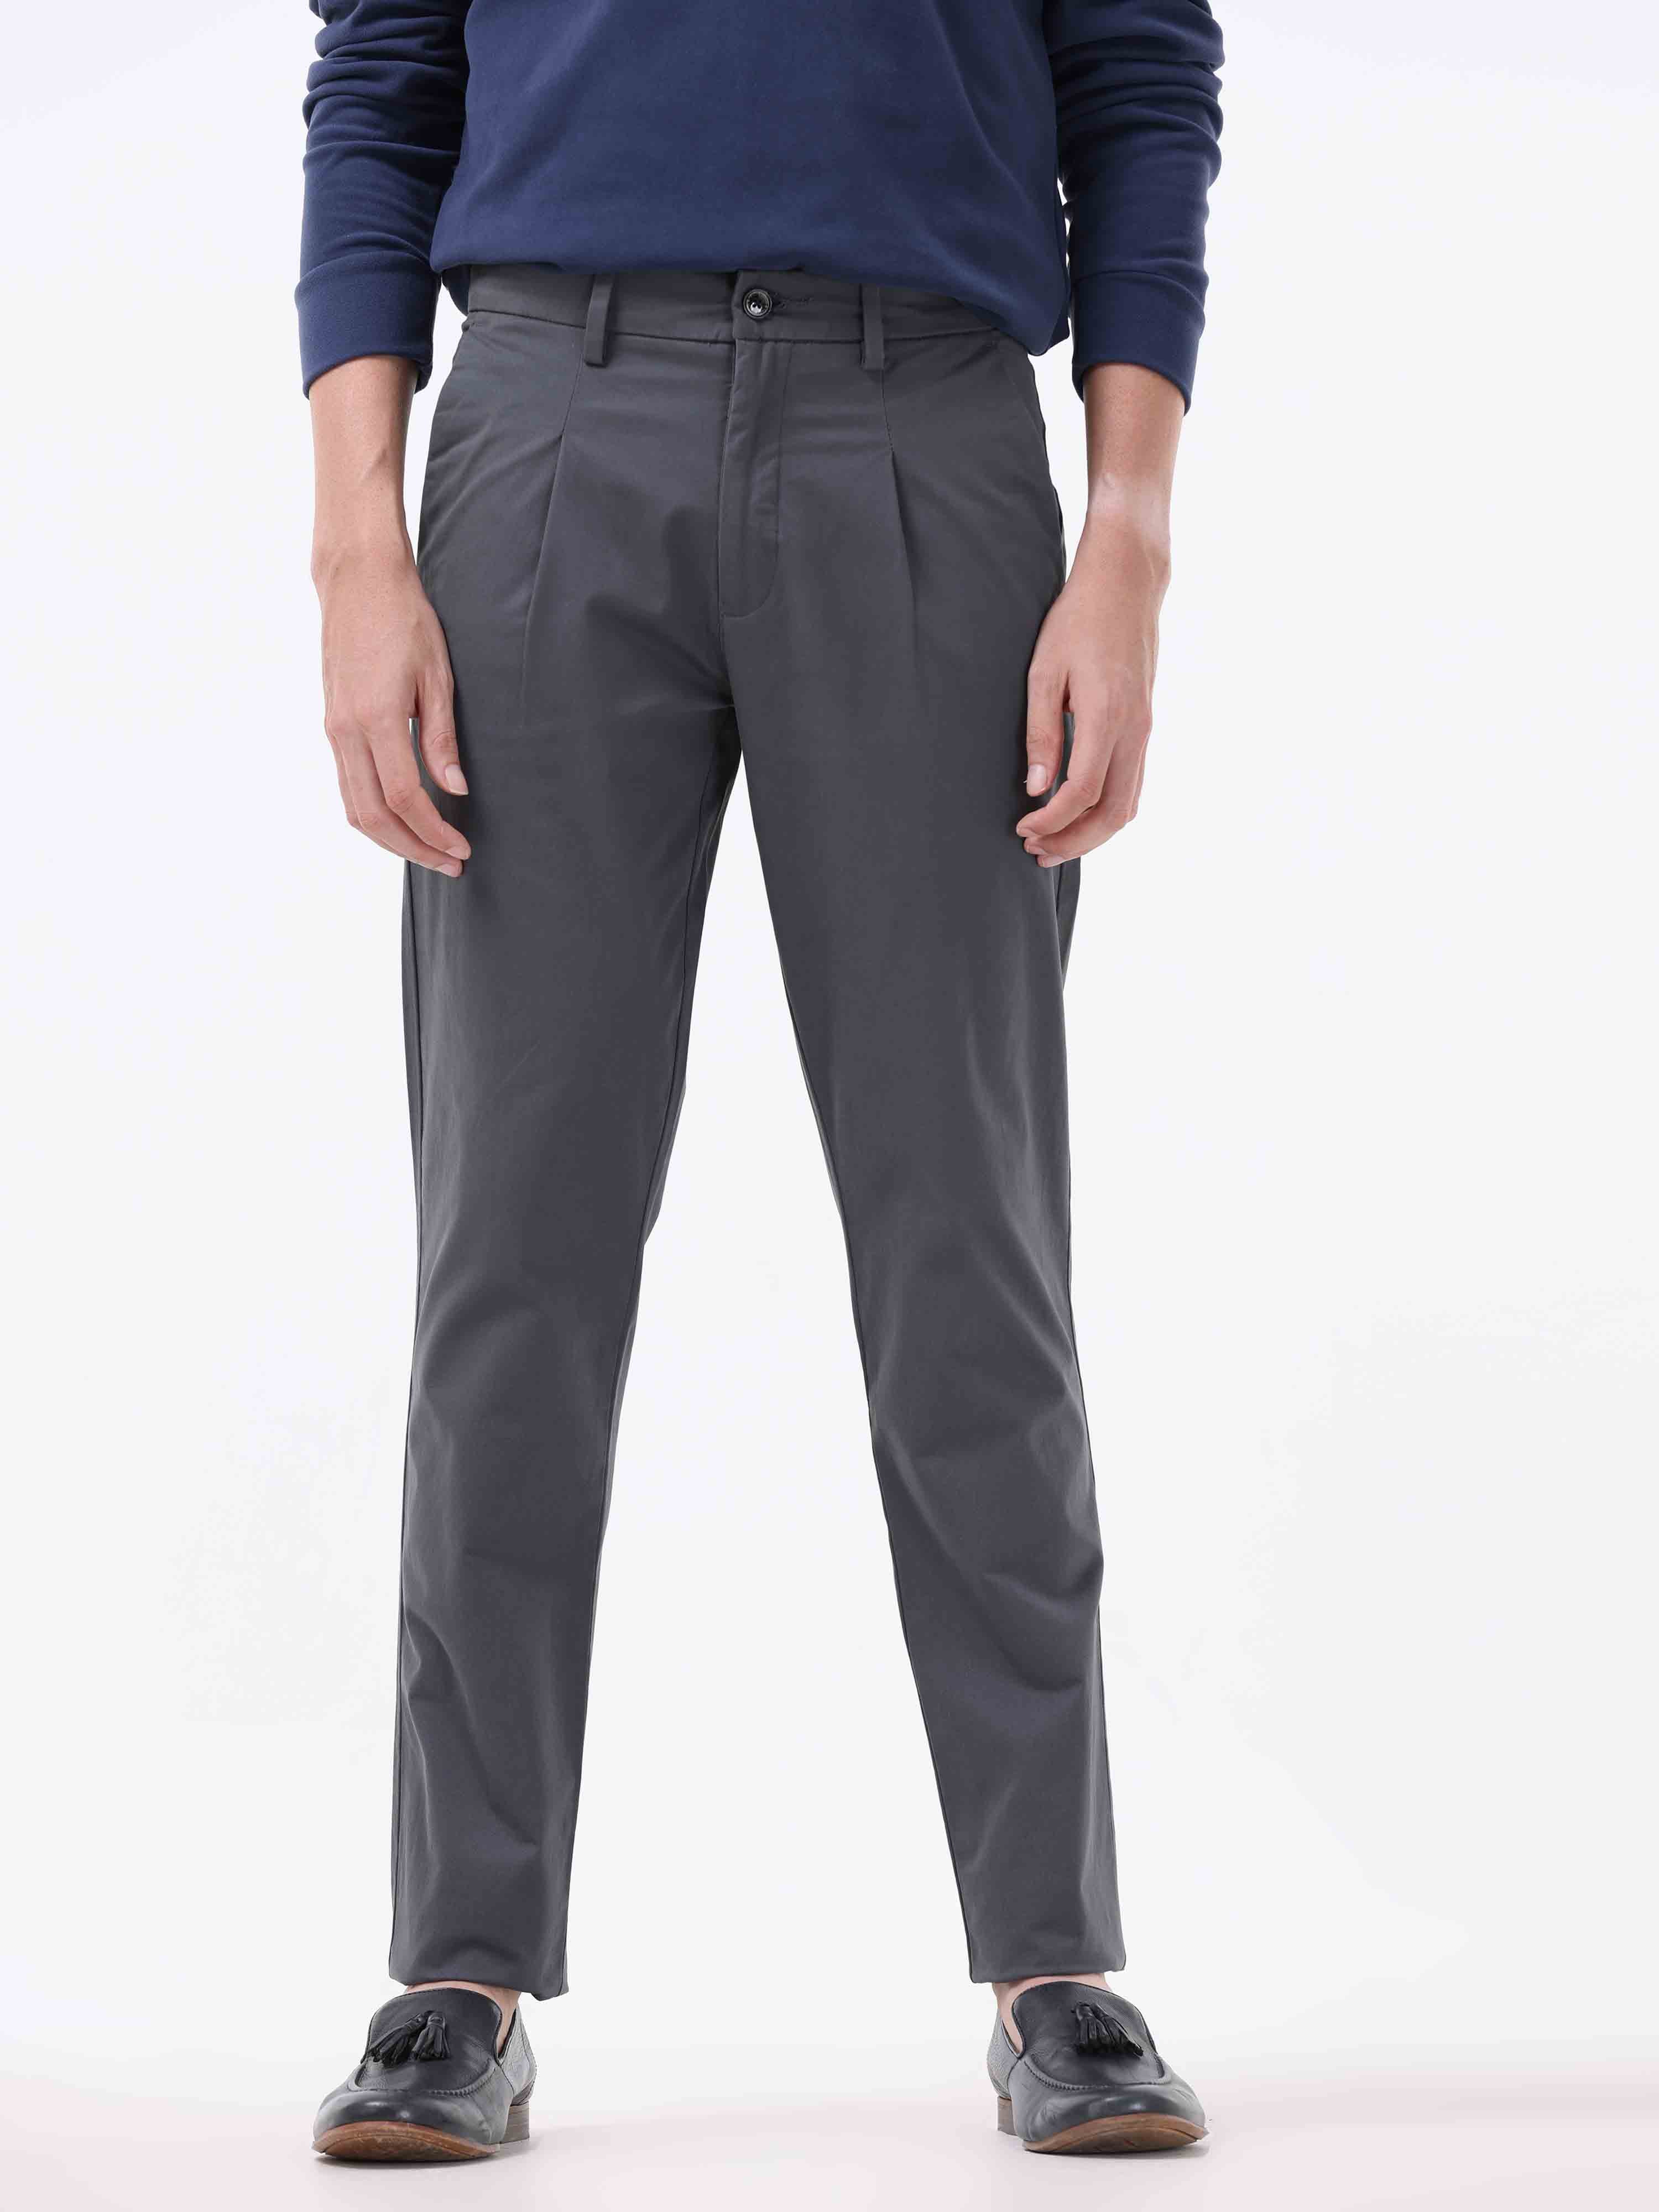 Cotton Men Colour Pants, Casual Wear, Pleated Trousers at Rs 455/piece in  Ahmedabad